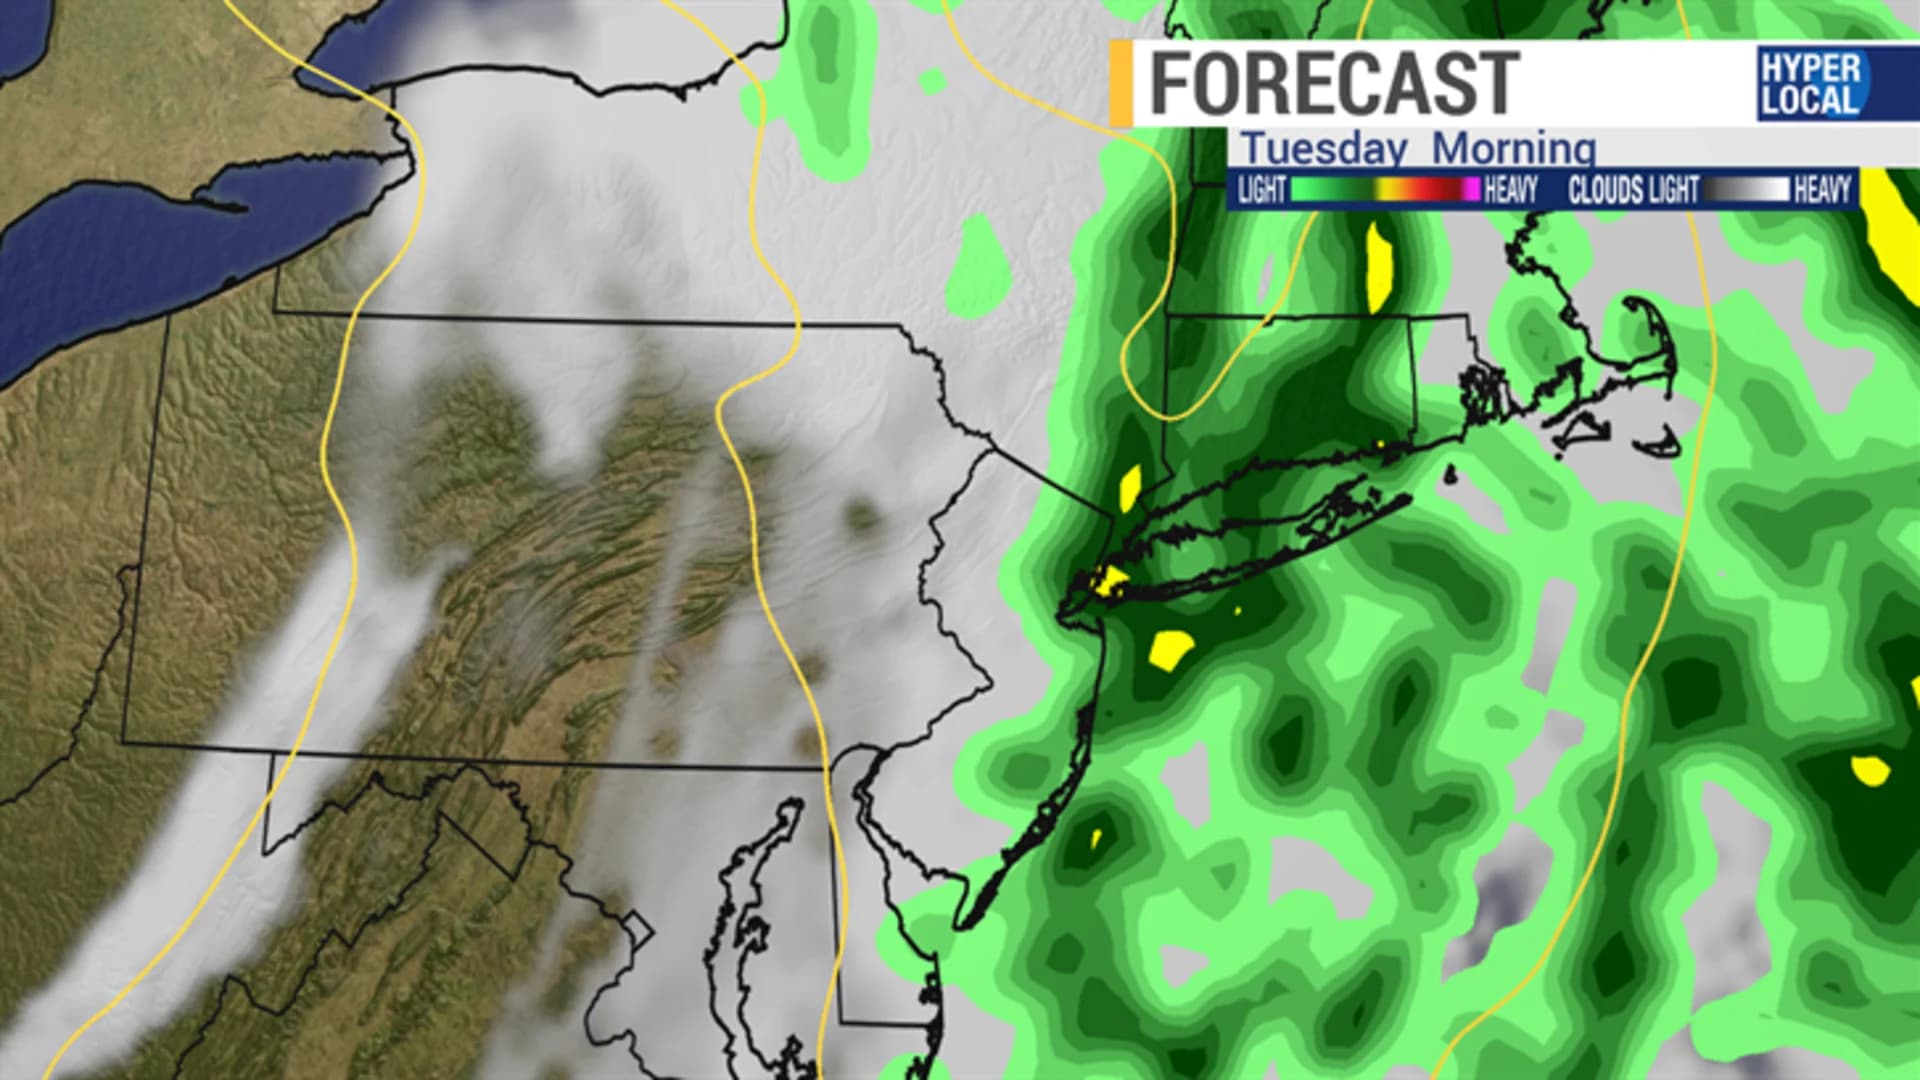 Showers, thunderstorms expected through Tuesday morning